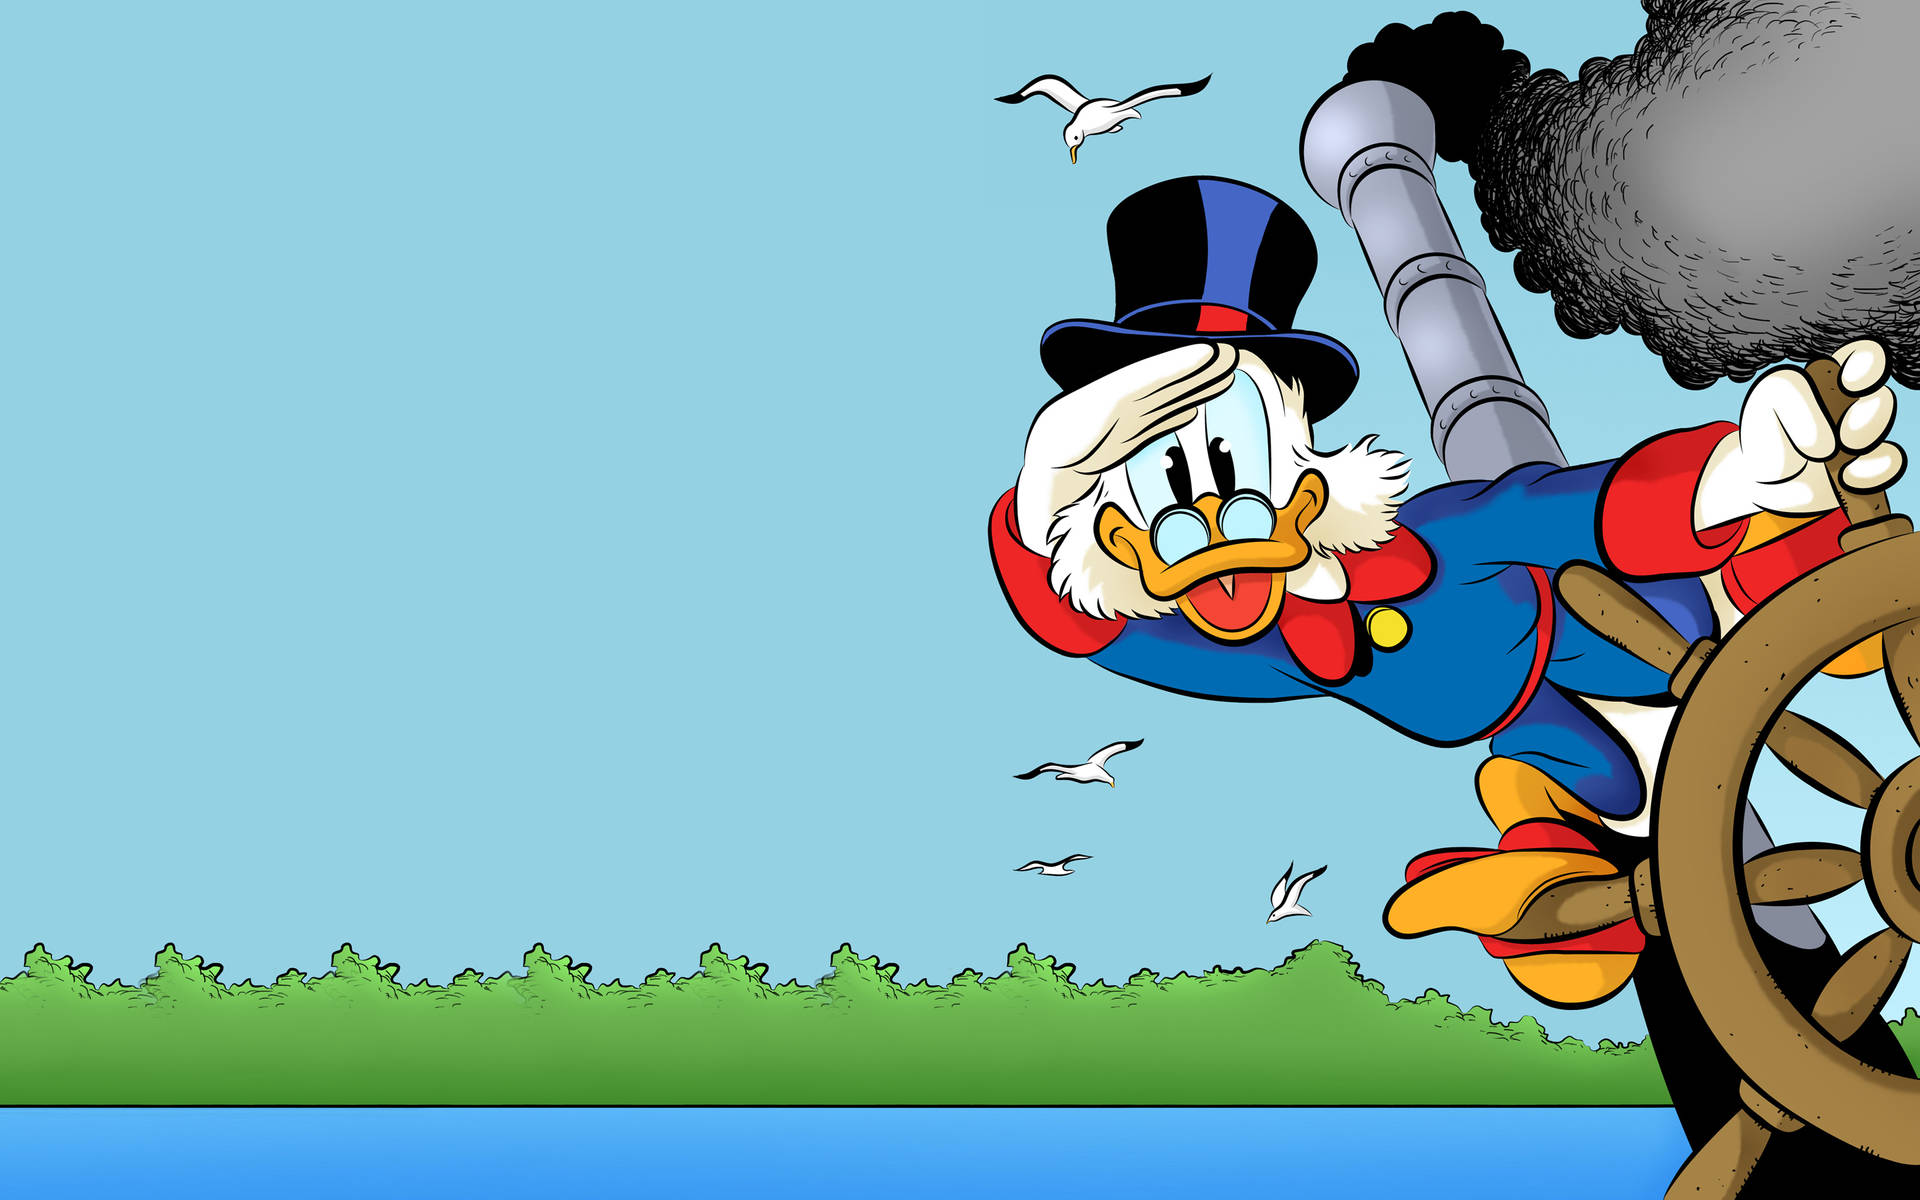 A Vibrant Illustration of Scrooge McDuck Piloting a Ship Wallpaper